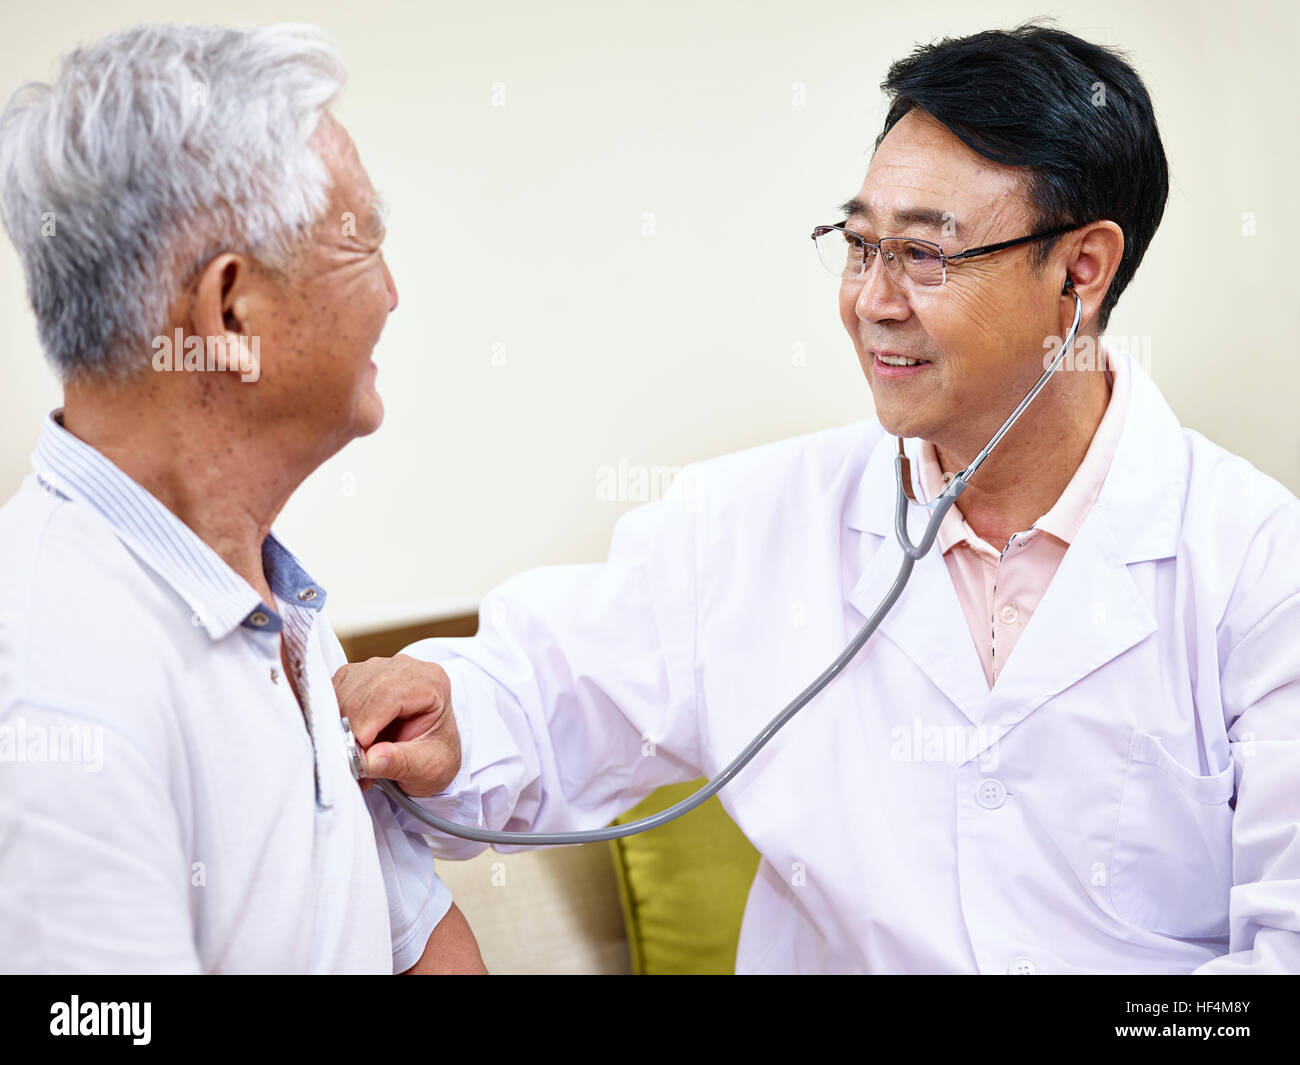 asian doctor checking senior patient using a stethoscope. Stock Photo